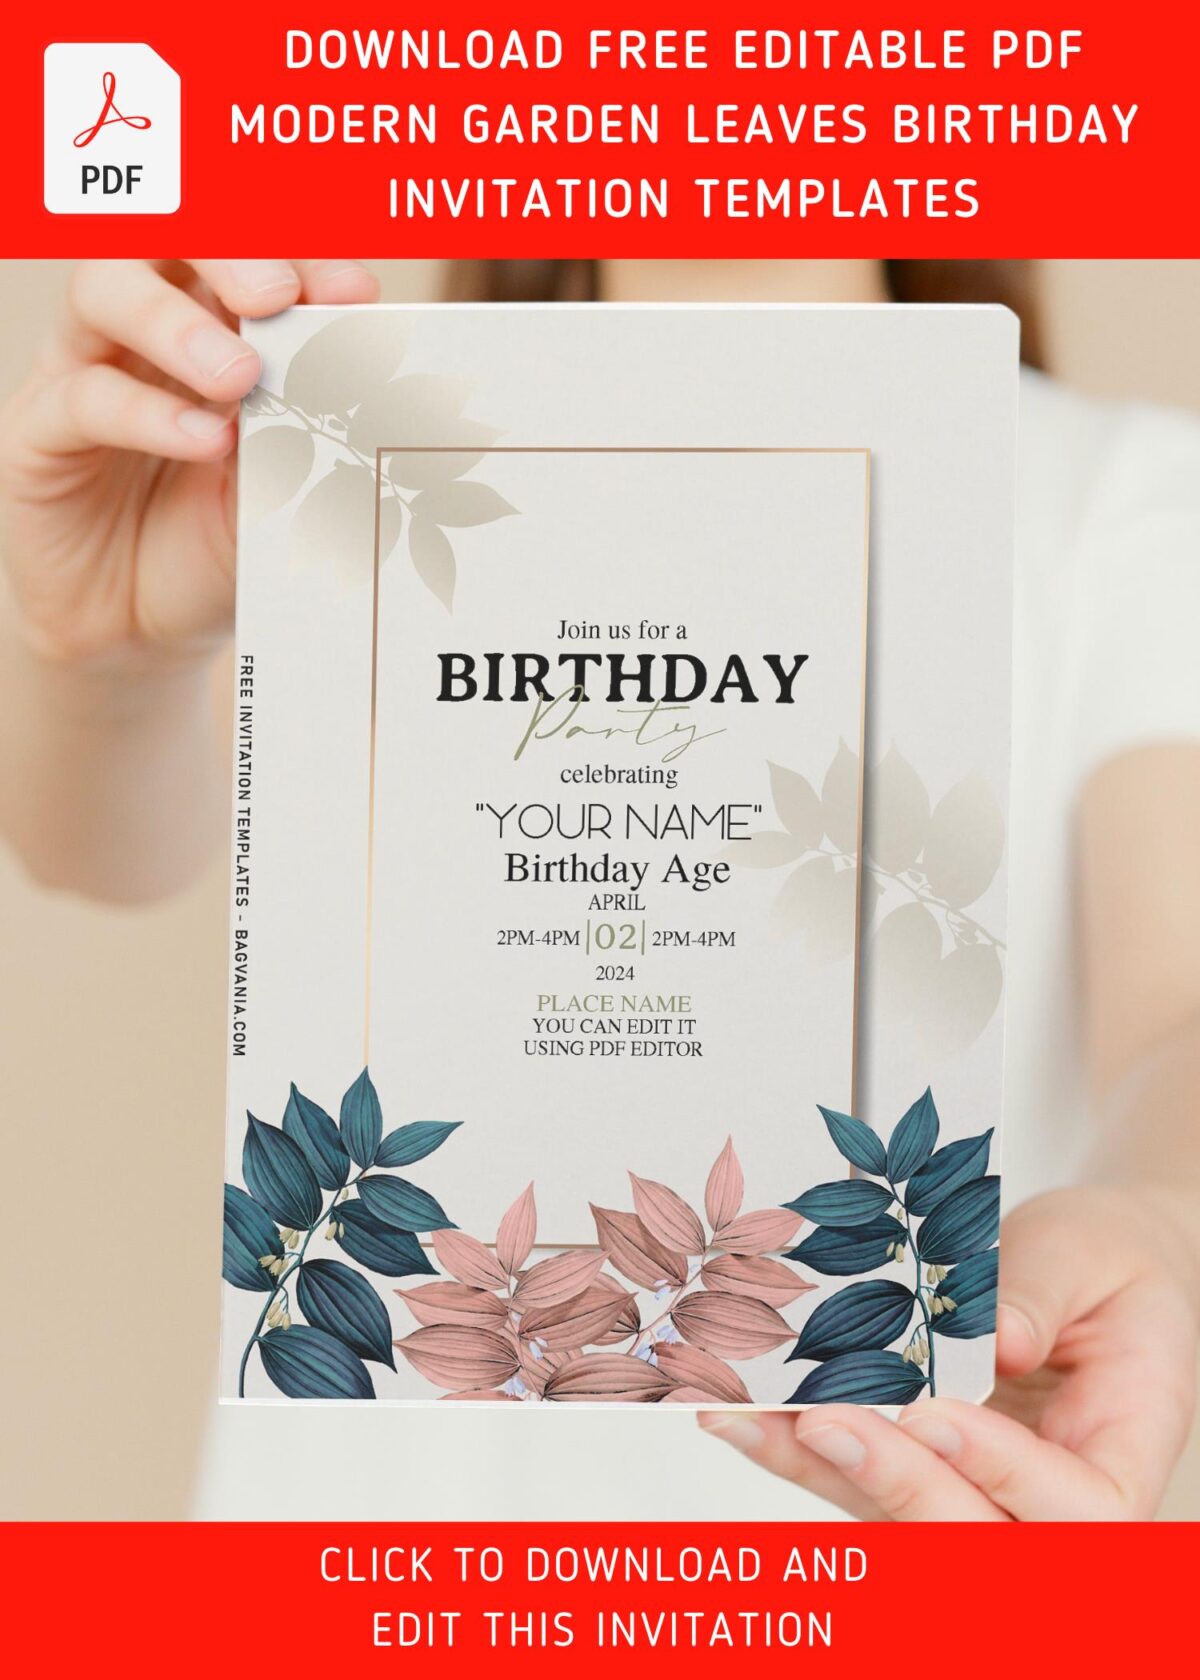 (Free Editable PDF) Garden Leaves Invitation Templates For Summer Celebrations with editable text